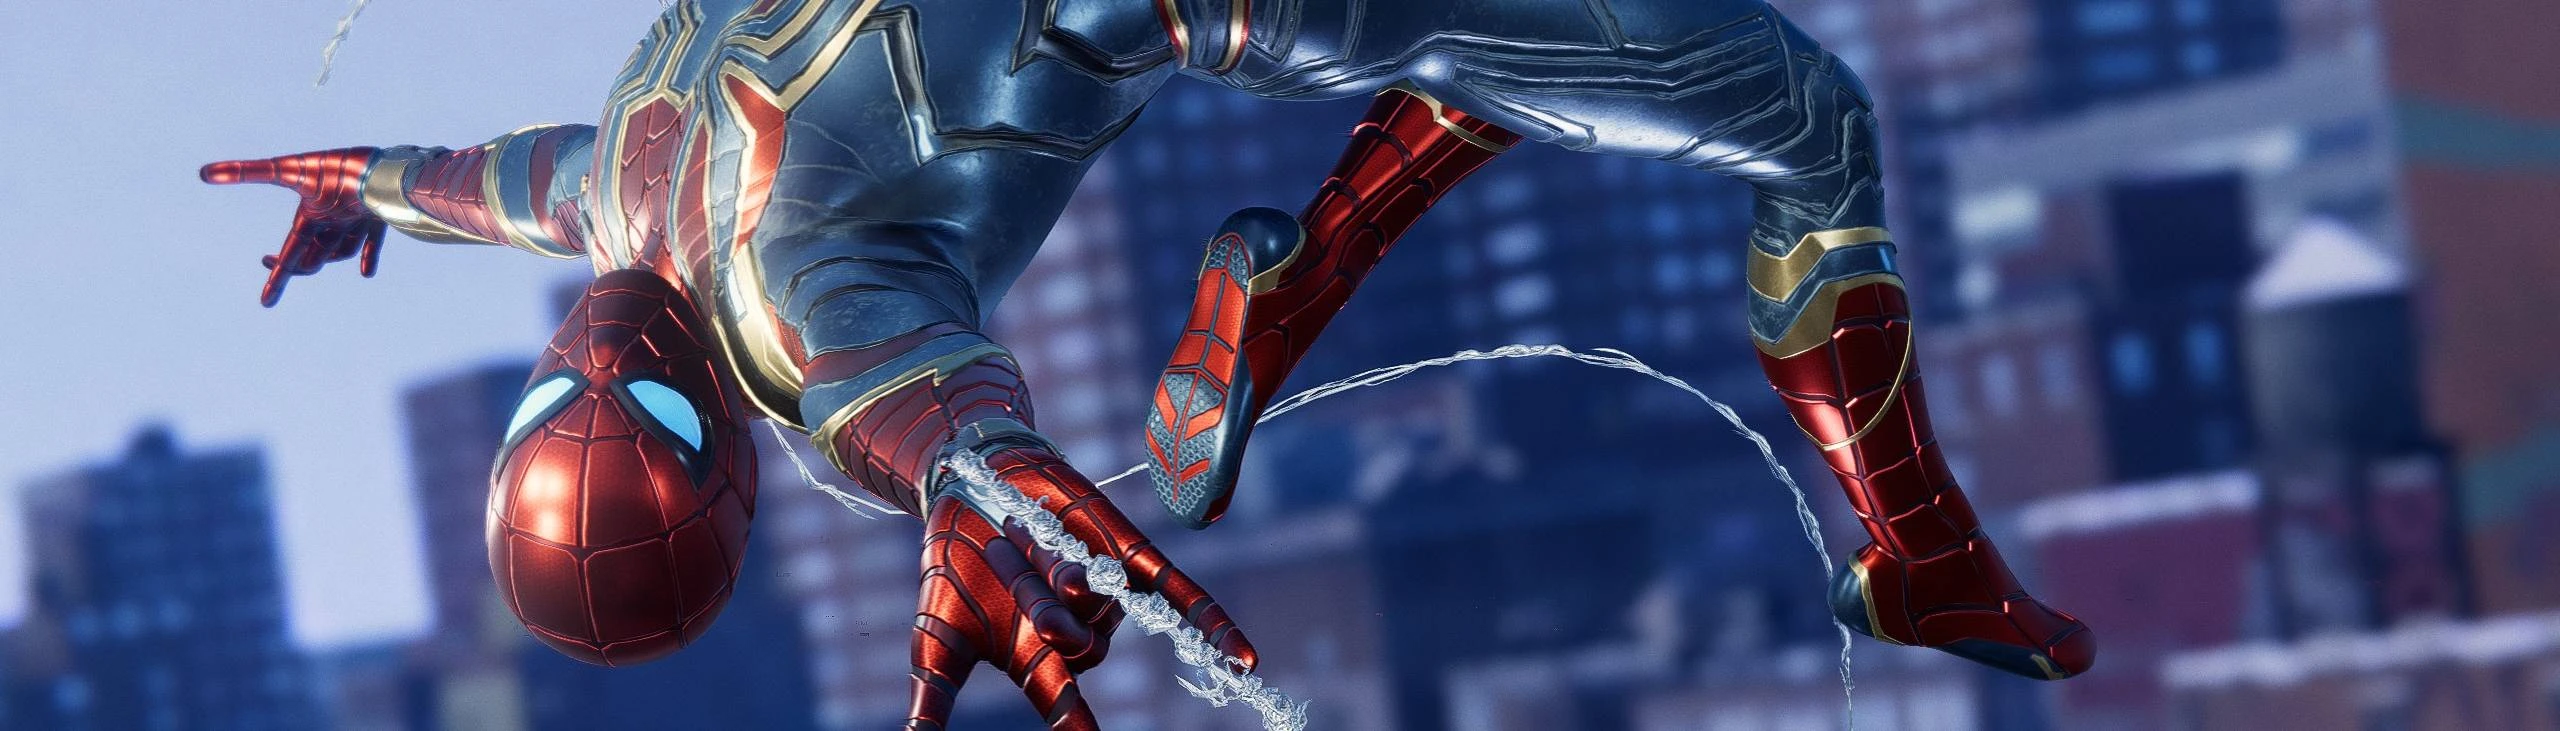 Spider-Man: Far From Home Spot Reveals Comic Book Iron Spider Suit - Heroic  Hollywood